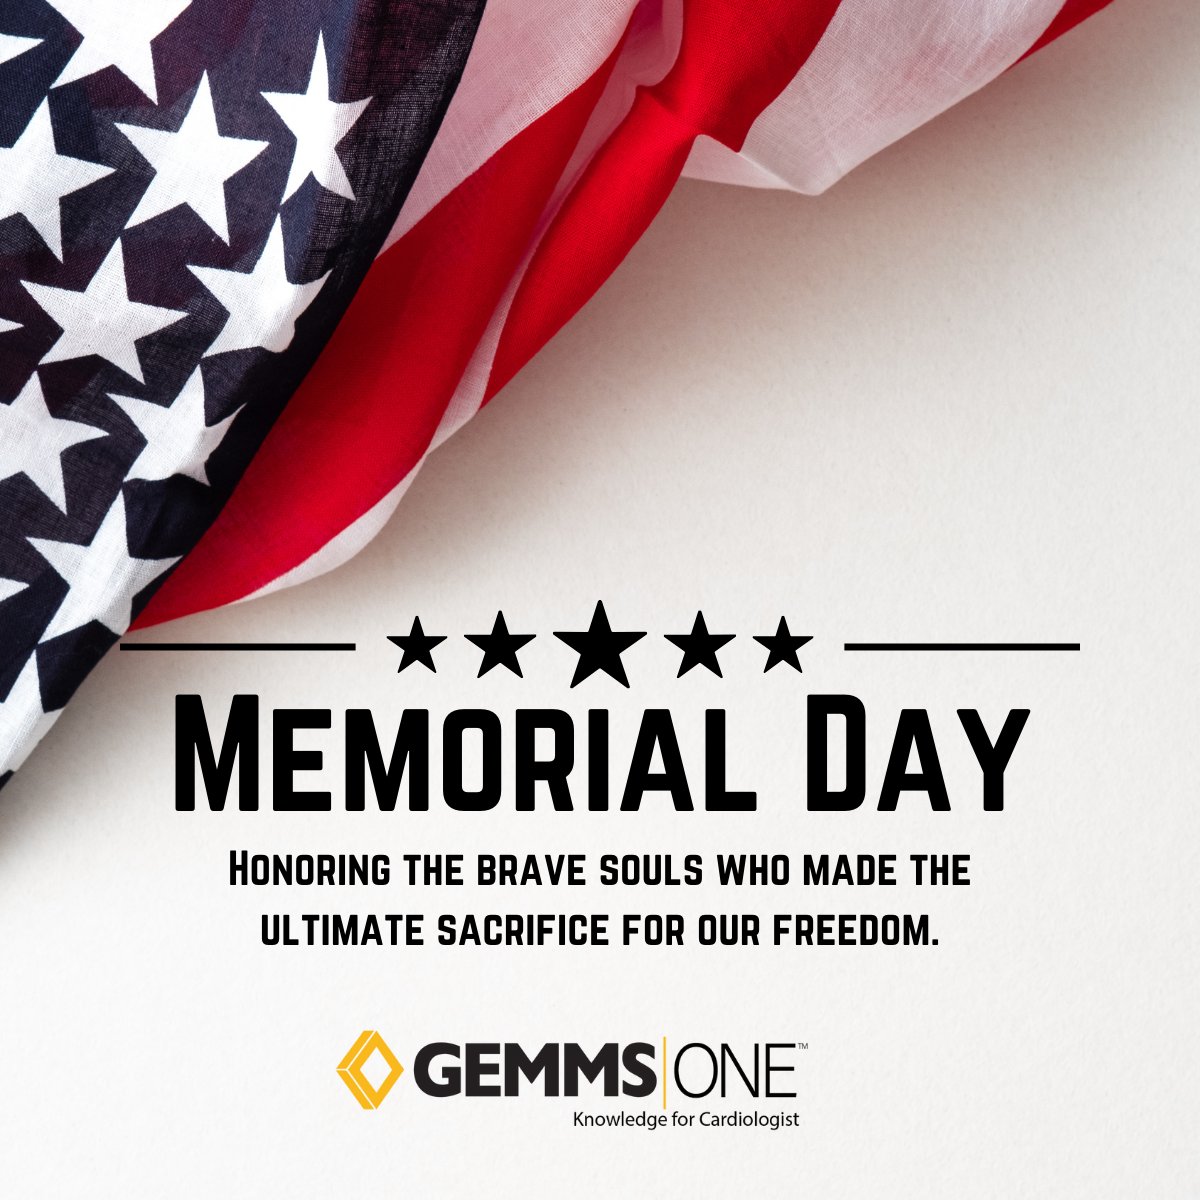 This Memorial Day, let's pause to remember and pay tribute to the heroes who laid down their lives in service to our nation. Their courage and selflessness will never be forgotten. 

#MemorialDay #NeverForget #HonorOurHeroes